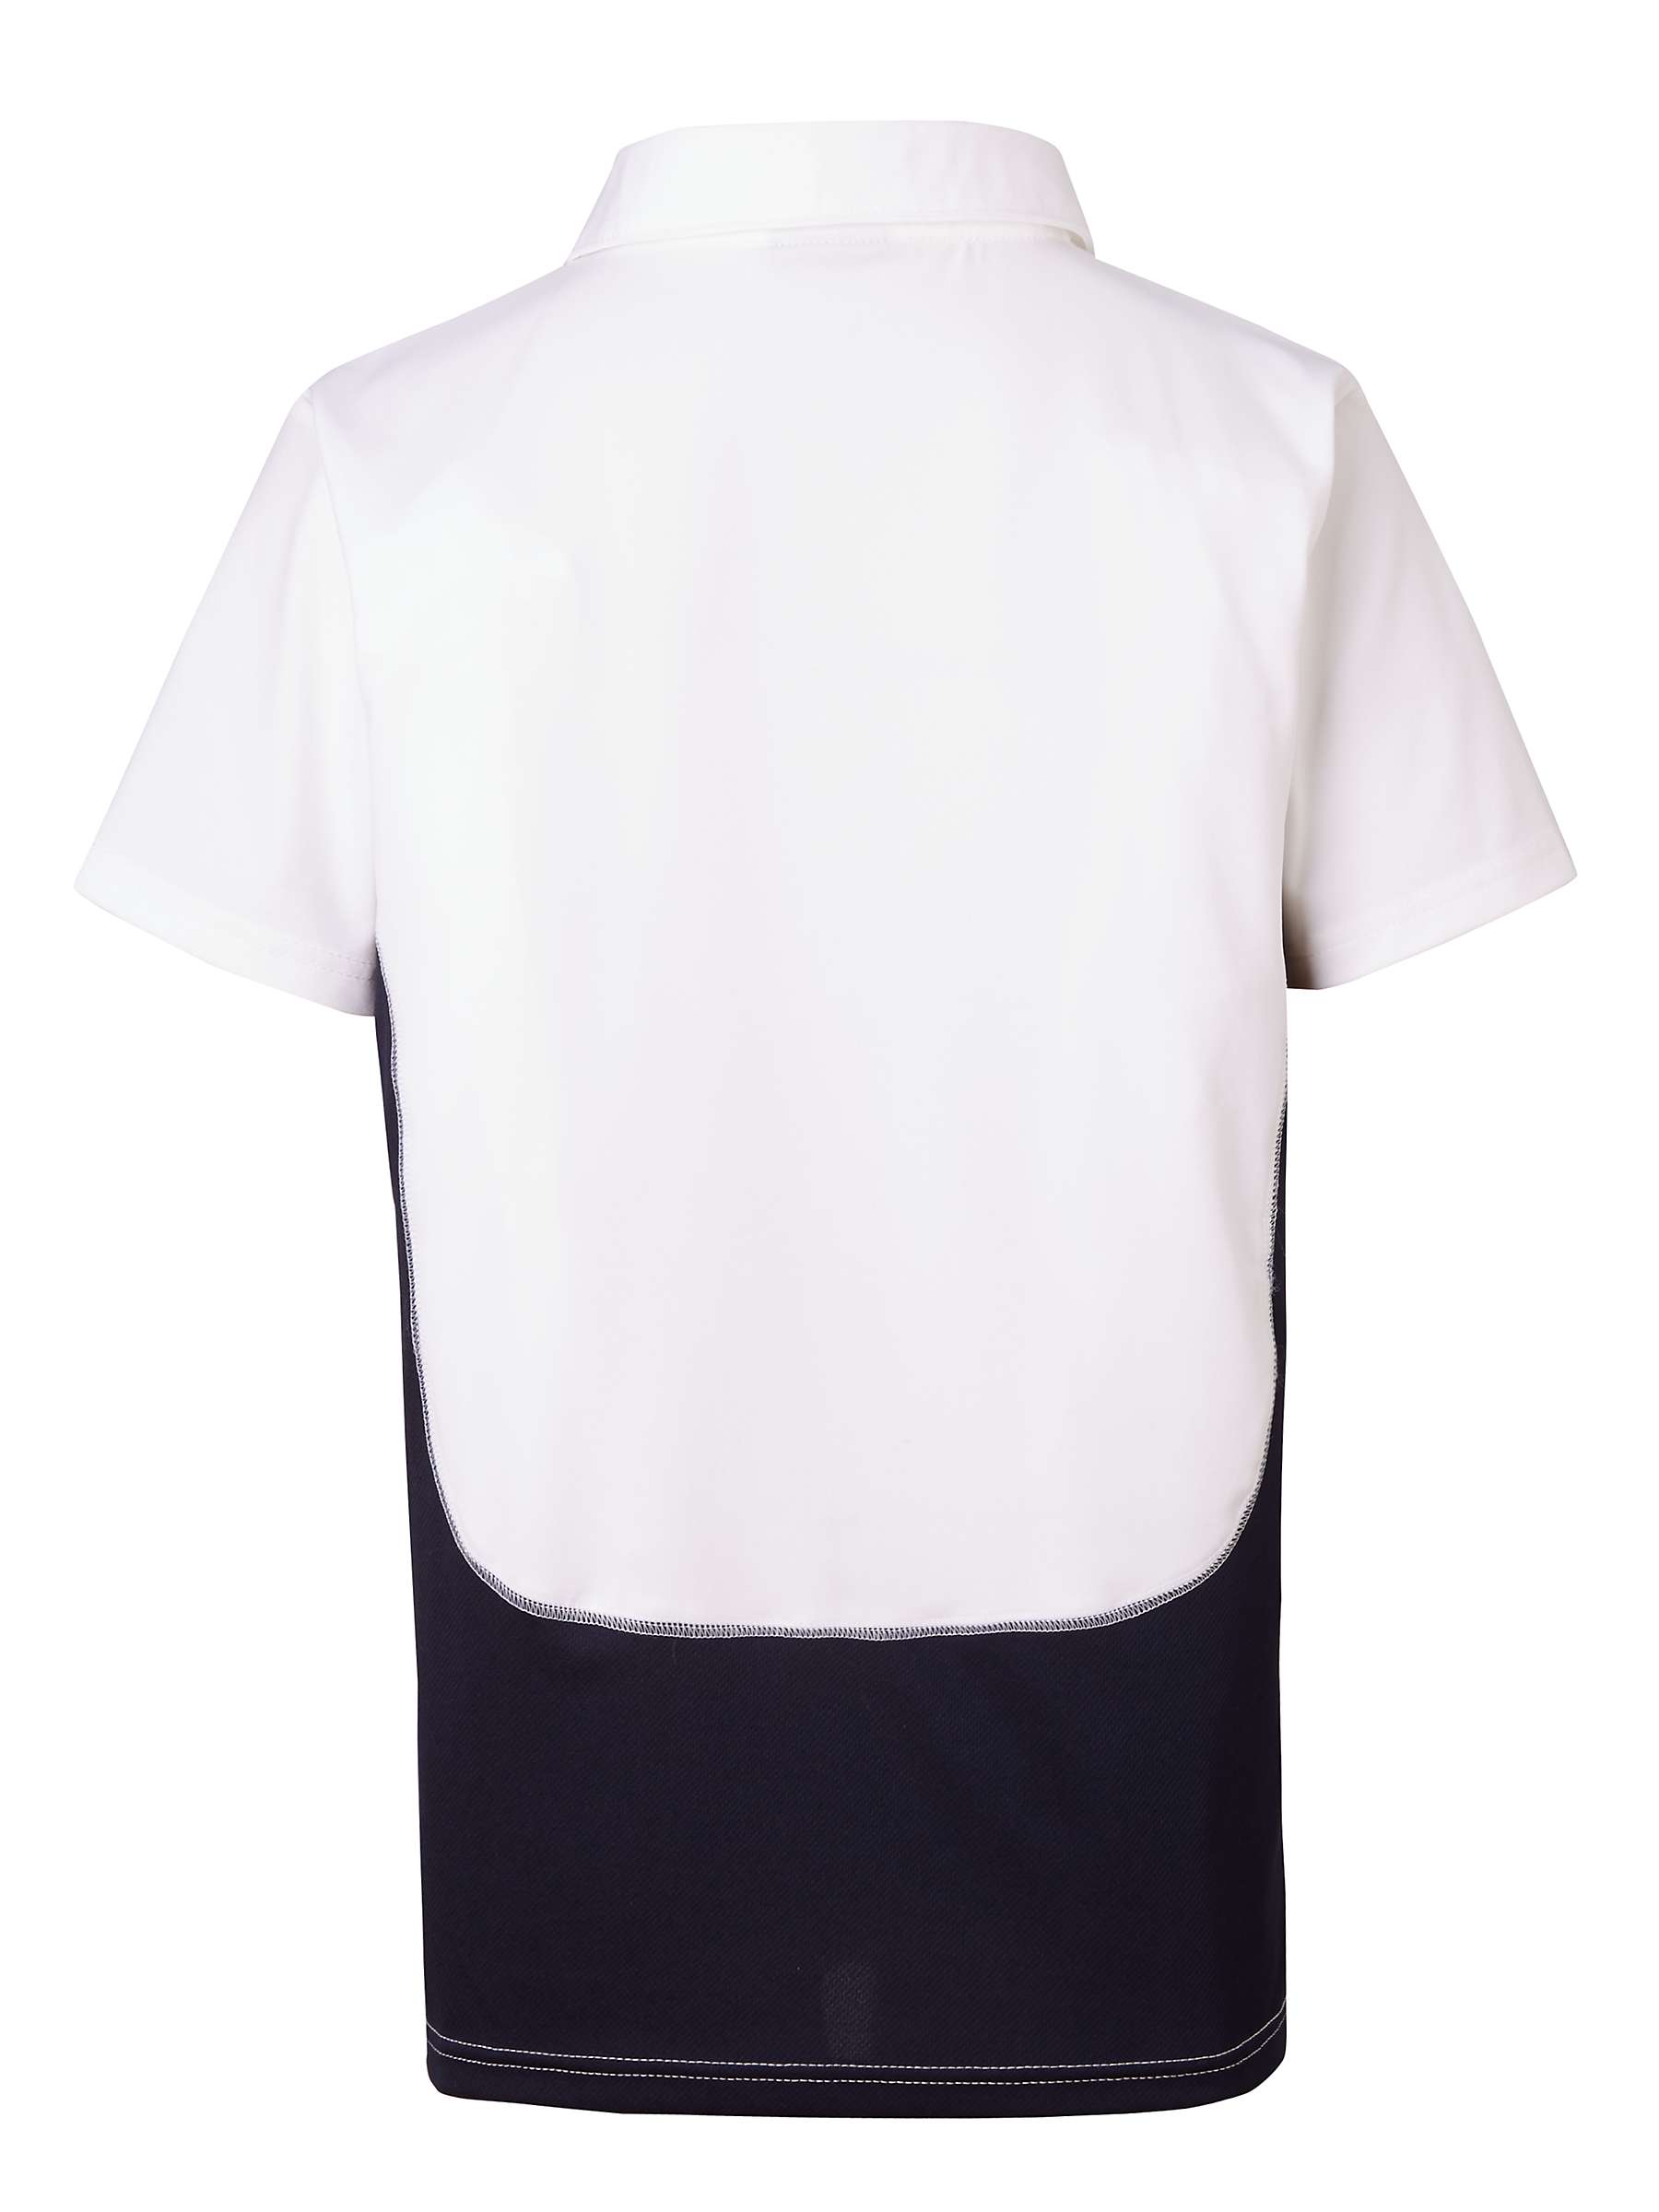 Buy Chigwell School Polo Shirt, White Online at johnlewis.com